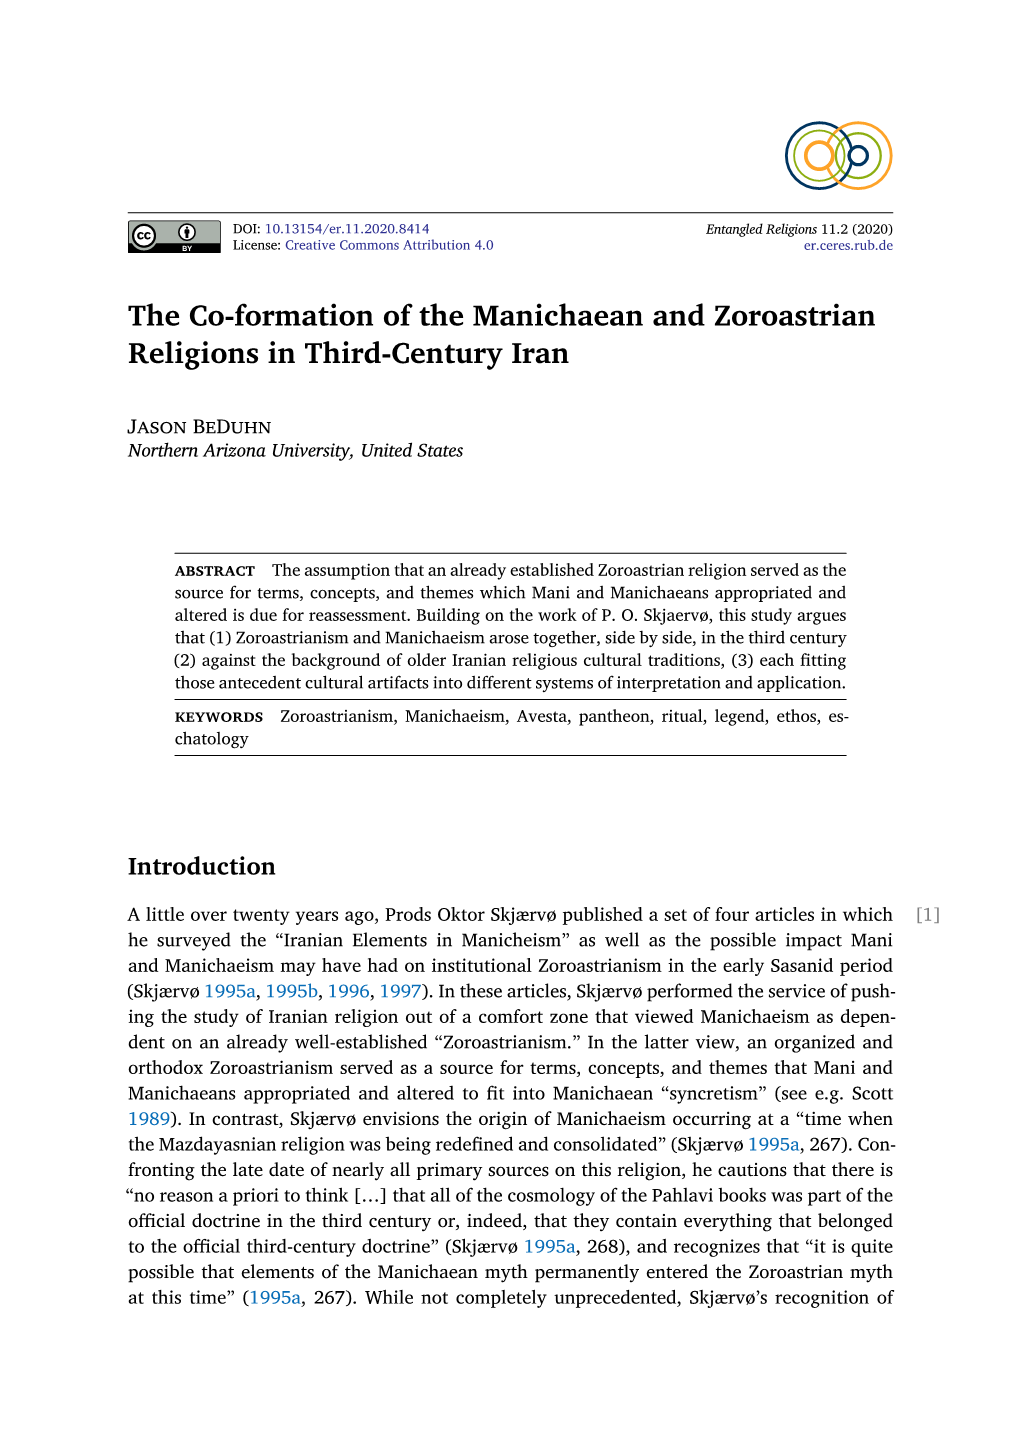 The Co-Formation of the Manichaean and Zoroastrian Religions in Third-Century Iran